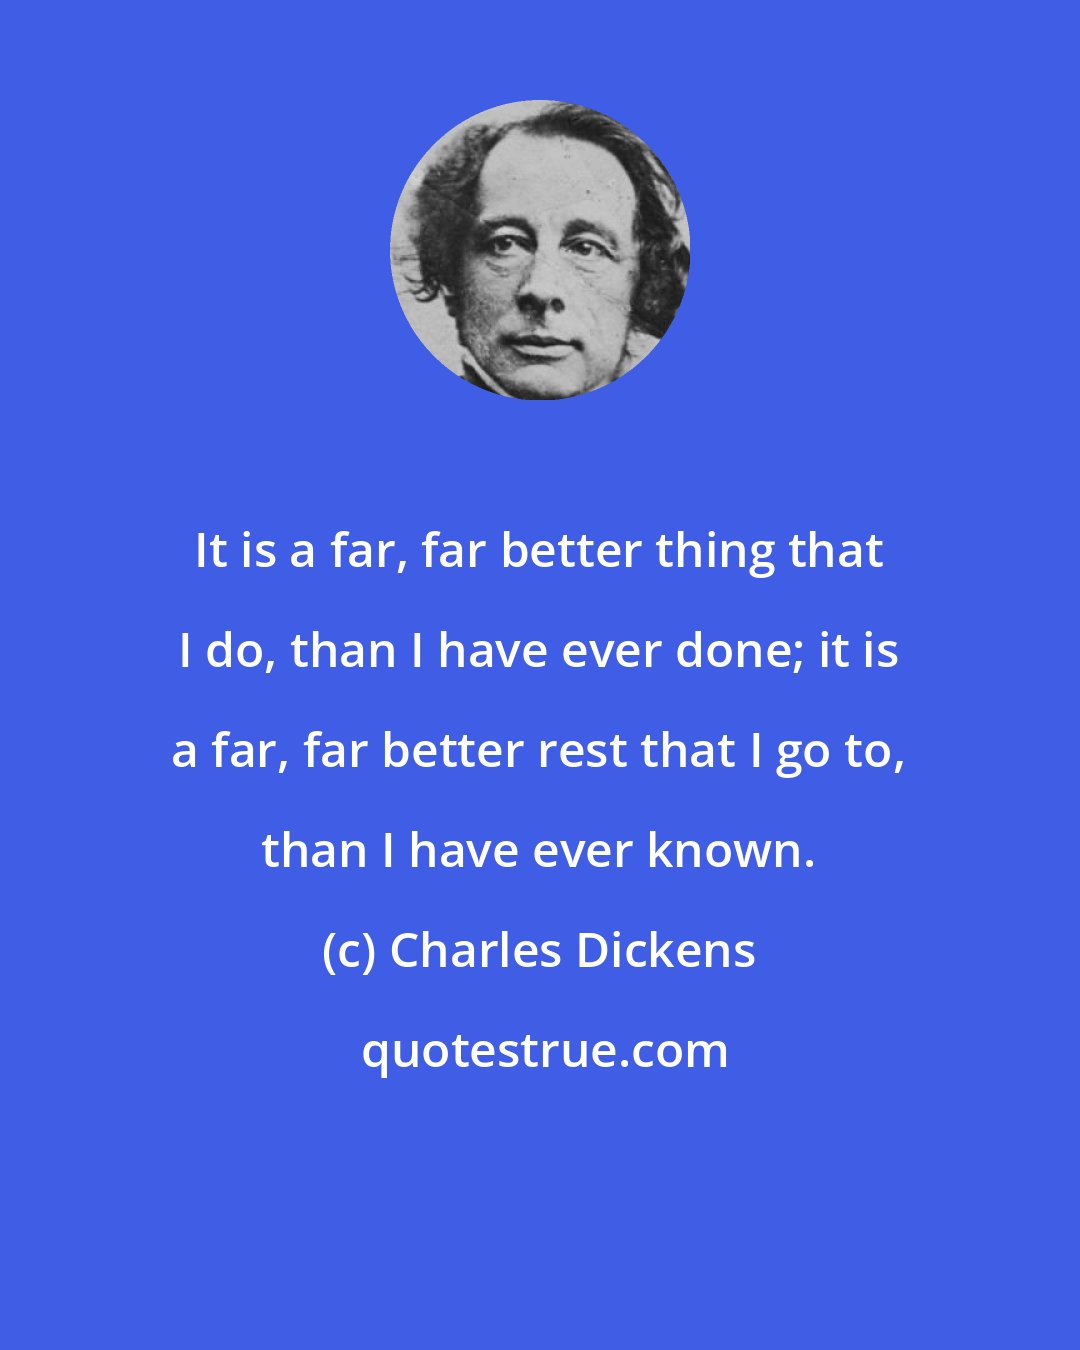 Charles Dickens: It is a far, far better thing that I do, than I have ever done; it is a far, far better rest that I go to, than I have ever known.